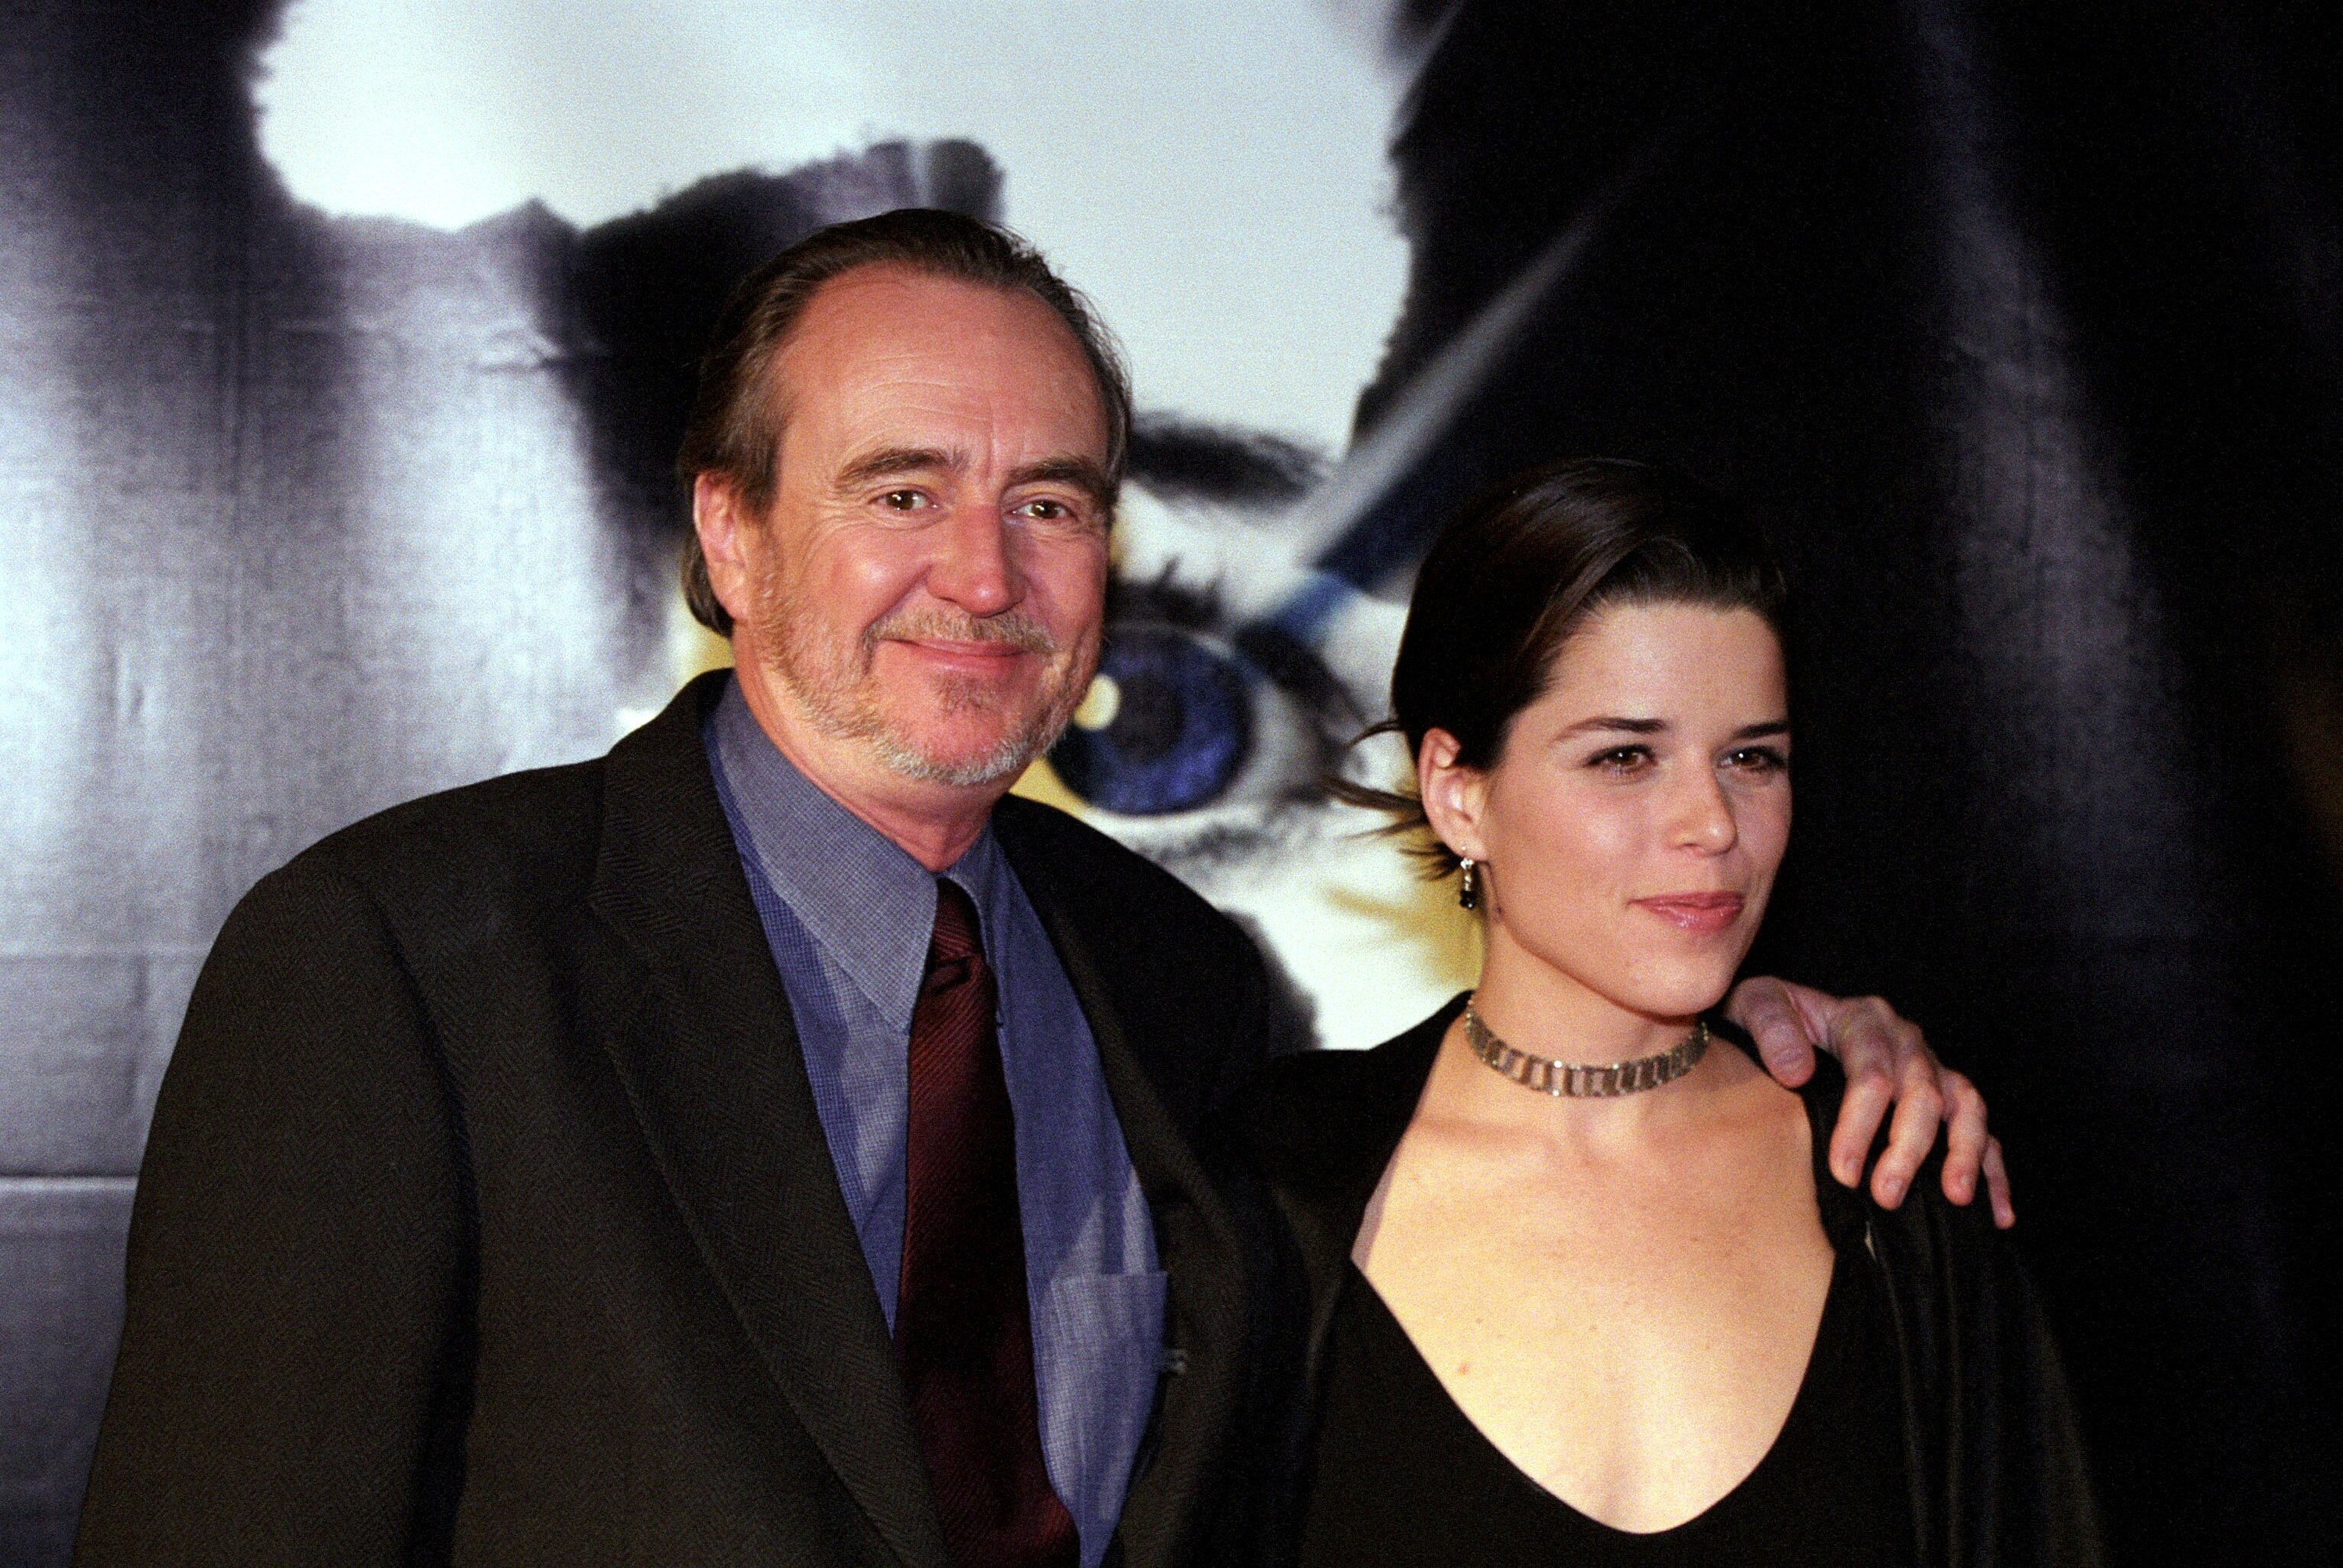 Wes Craven and Neve Campbell